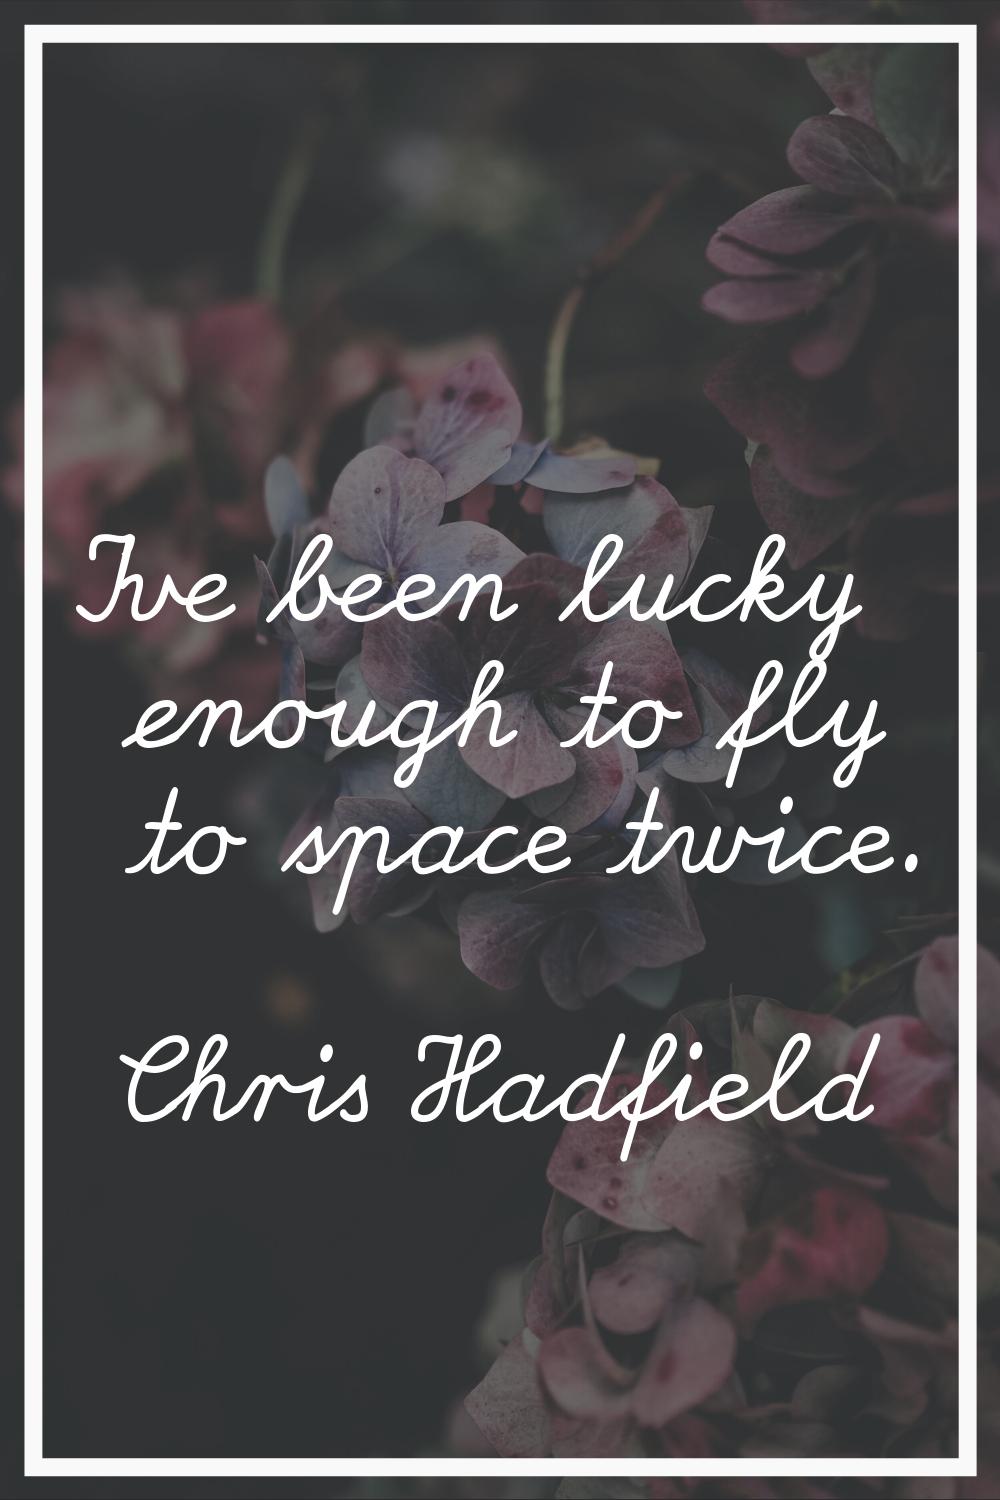 I've been lucky enough to fly to space twice.